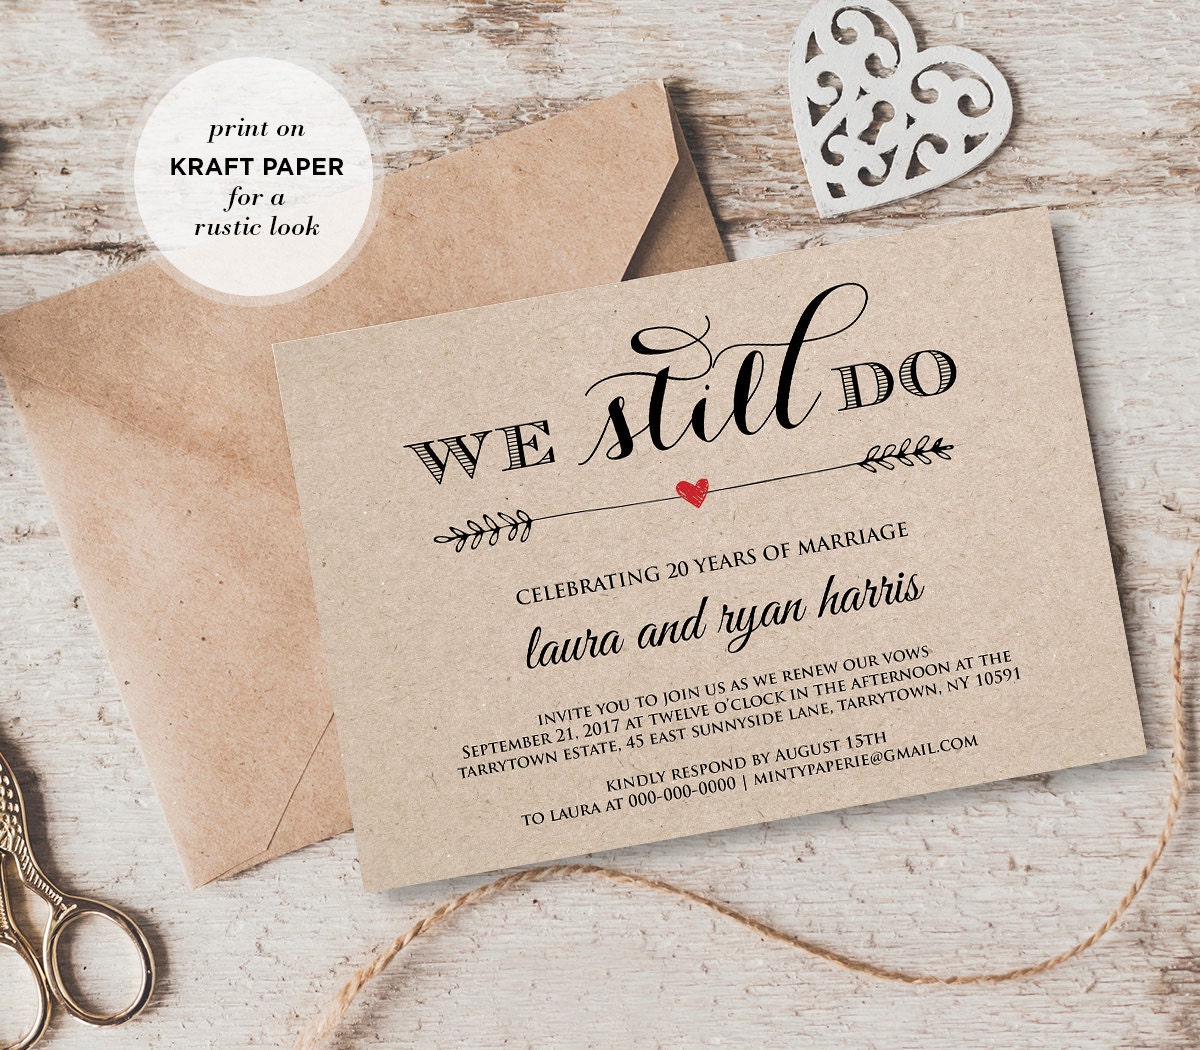 Vow Renewal Invitation Template We Still Do Instant Download Wedding Anniversary Renew Vows